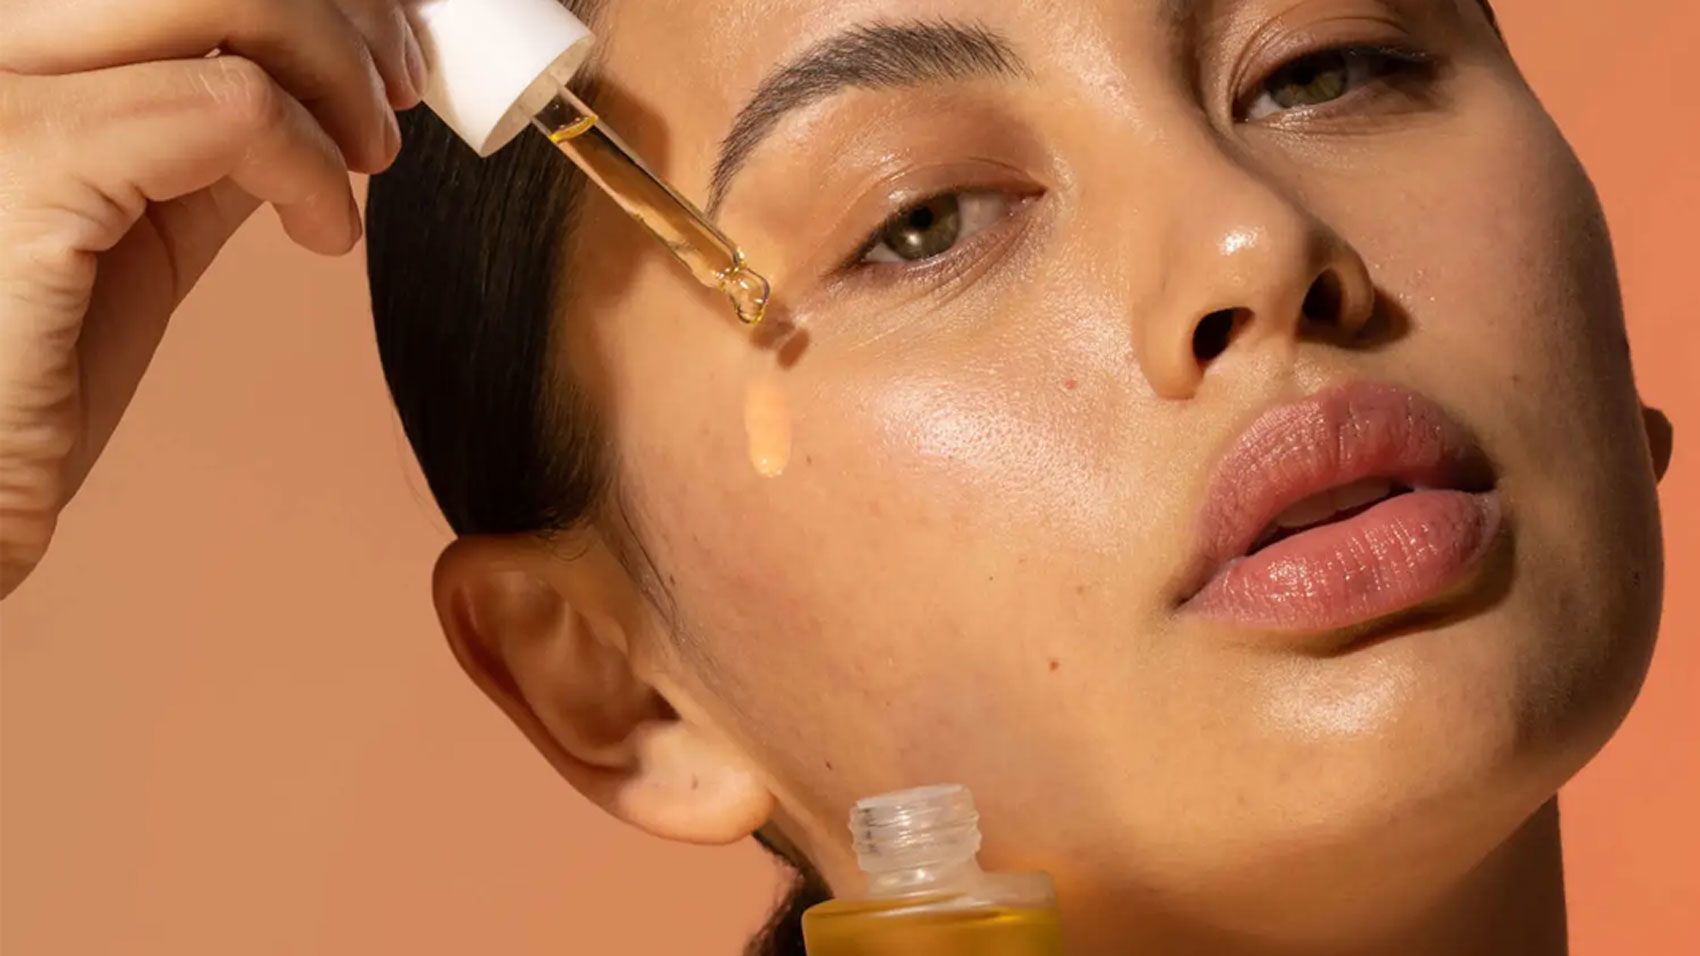 How To Use a Facial Oil the Right Way